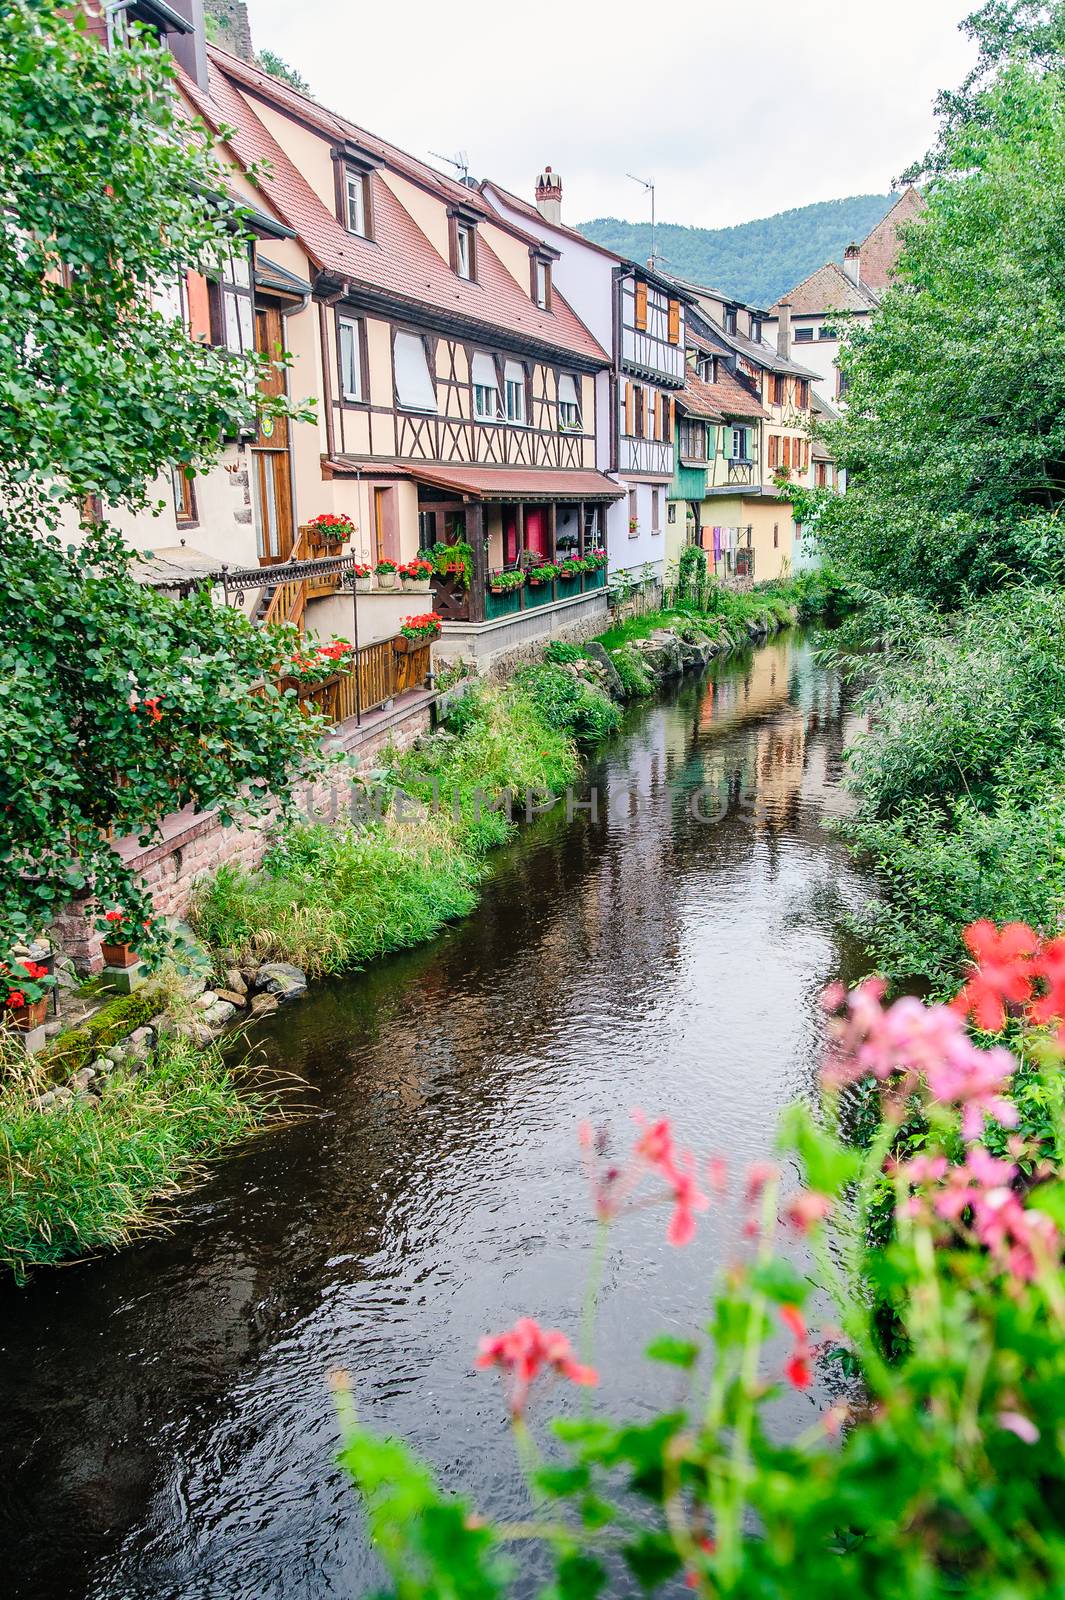 Traditional houses by a river in alsace, france